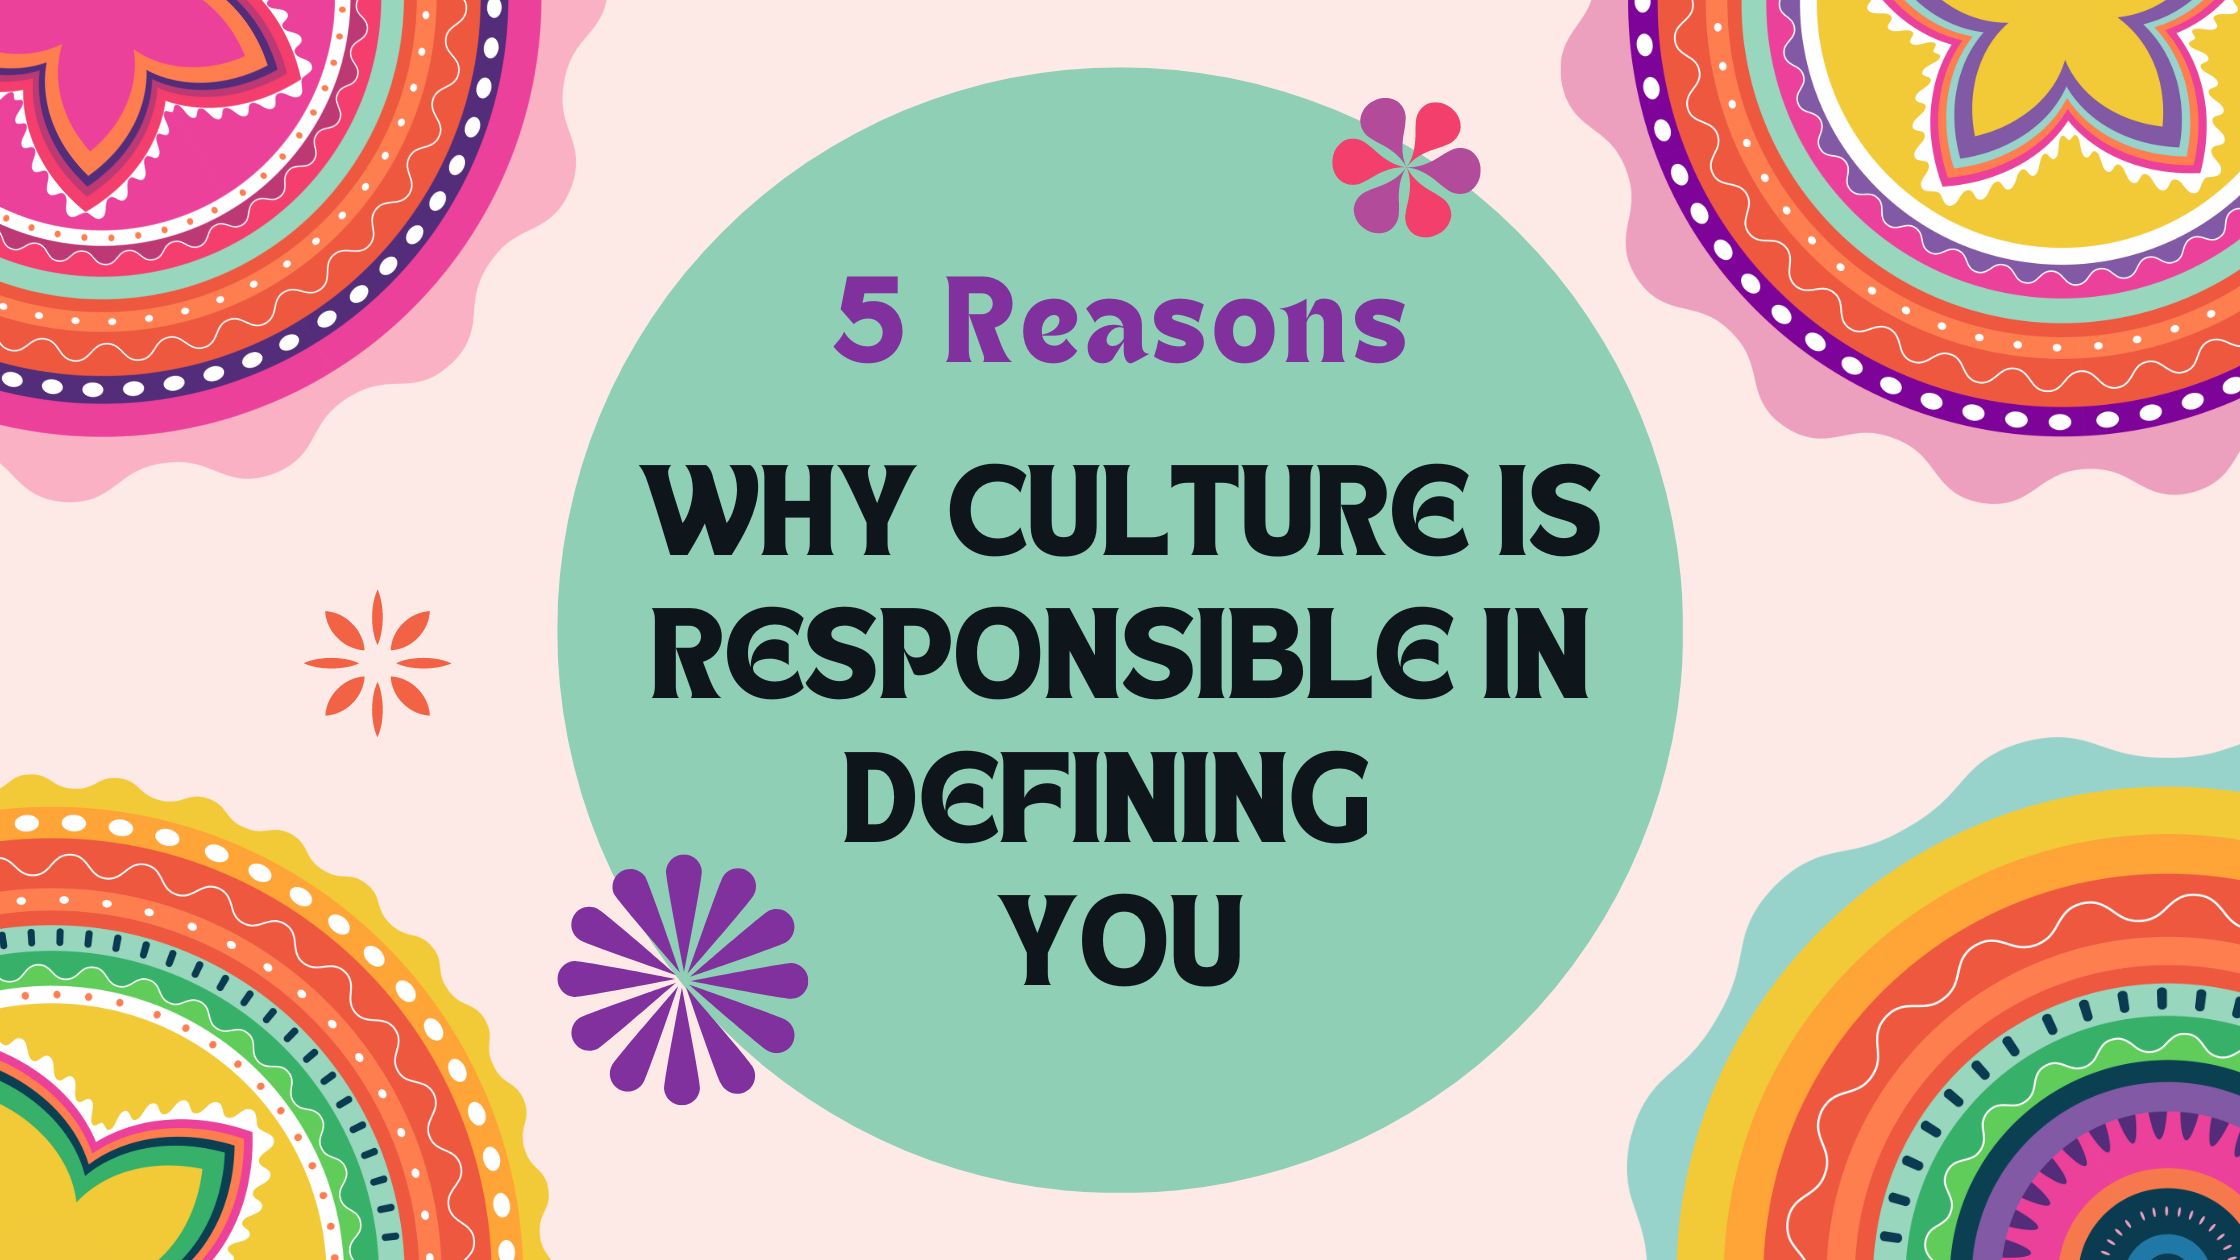 5 Reasons why culture is responsible in defining you